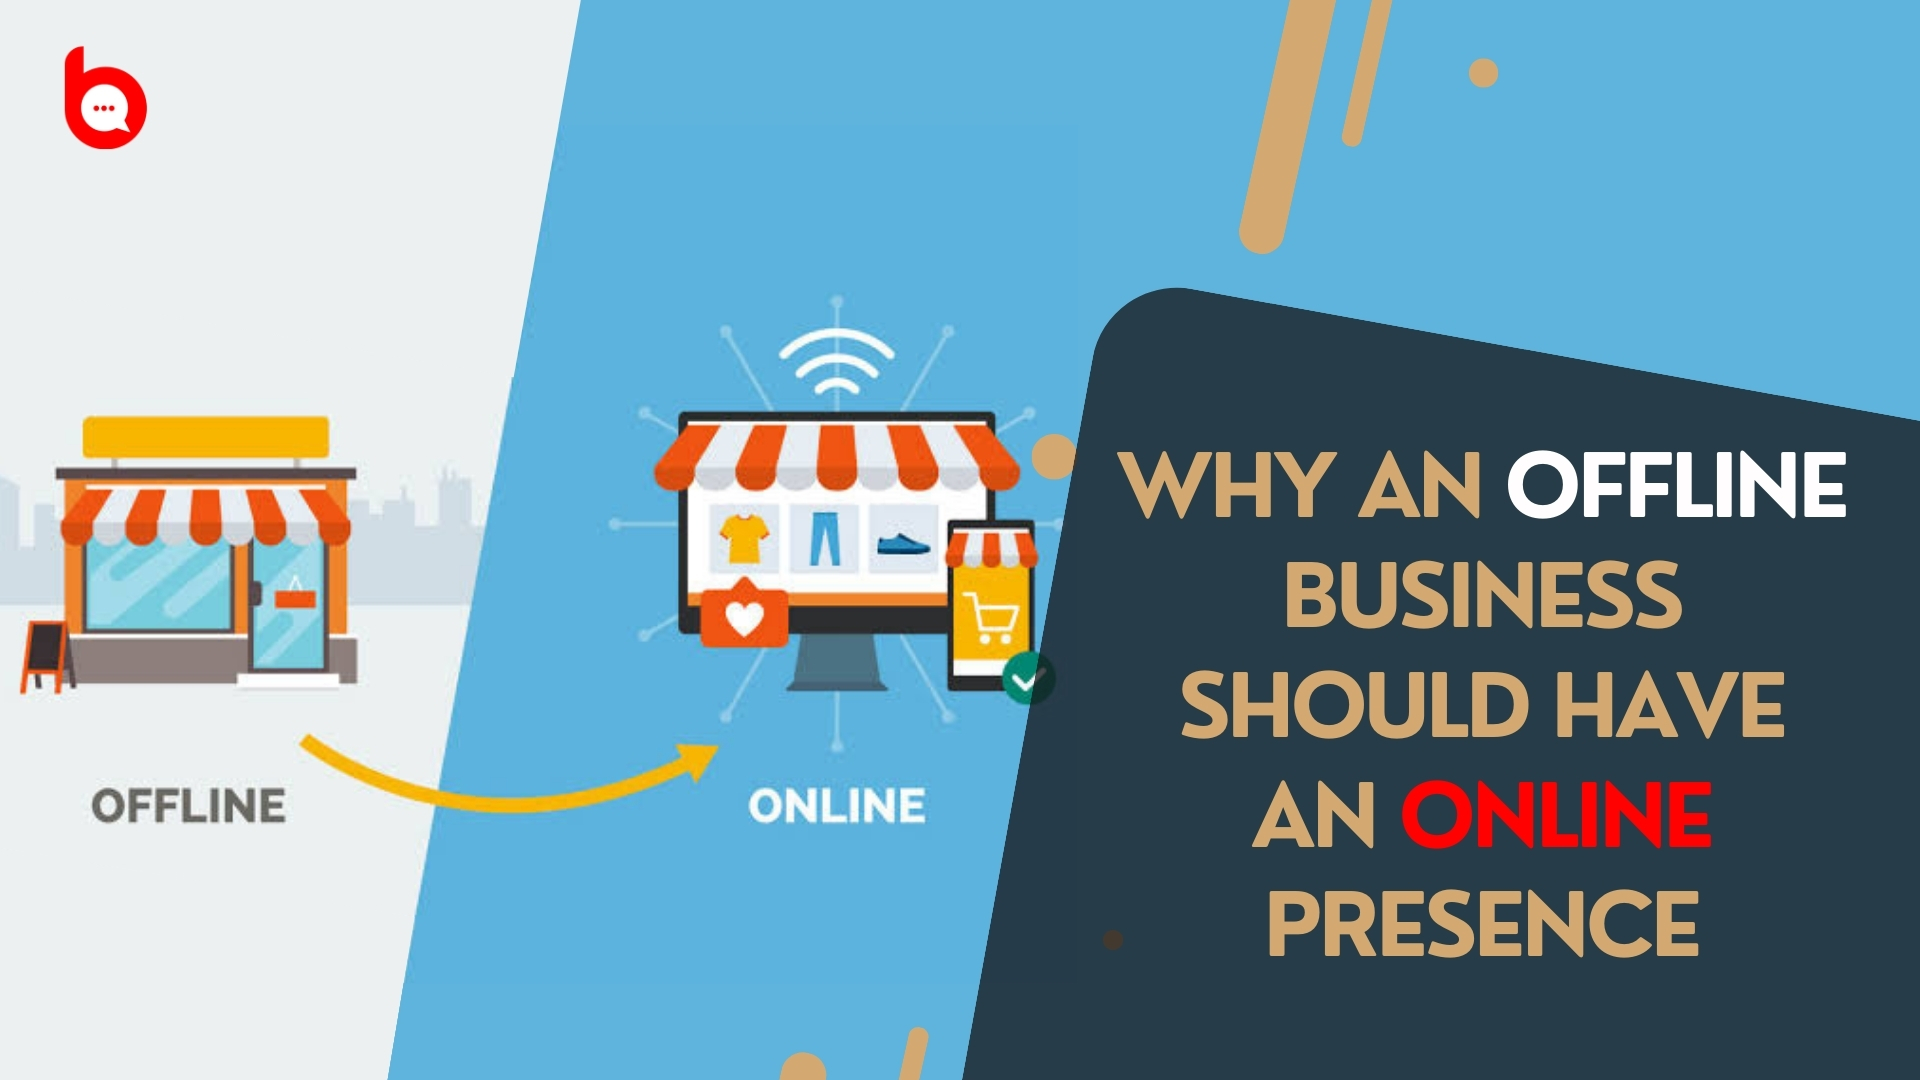 You are currently viewing WHY AN OFFLINE BUSINESS SHOULD HAVE AN ONLINE PRESENCE